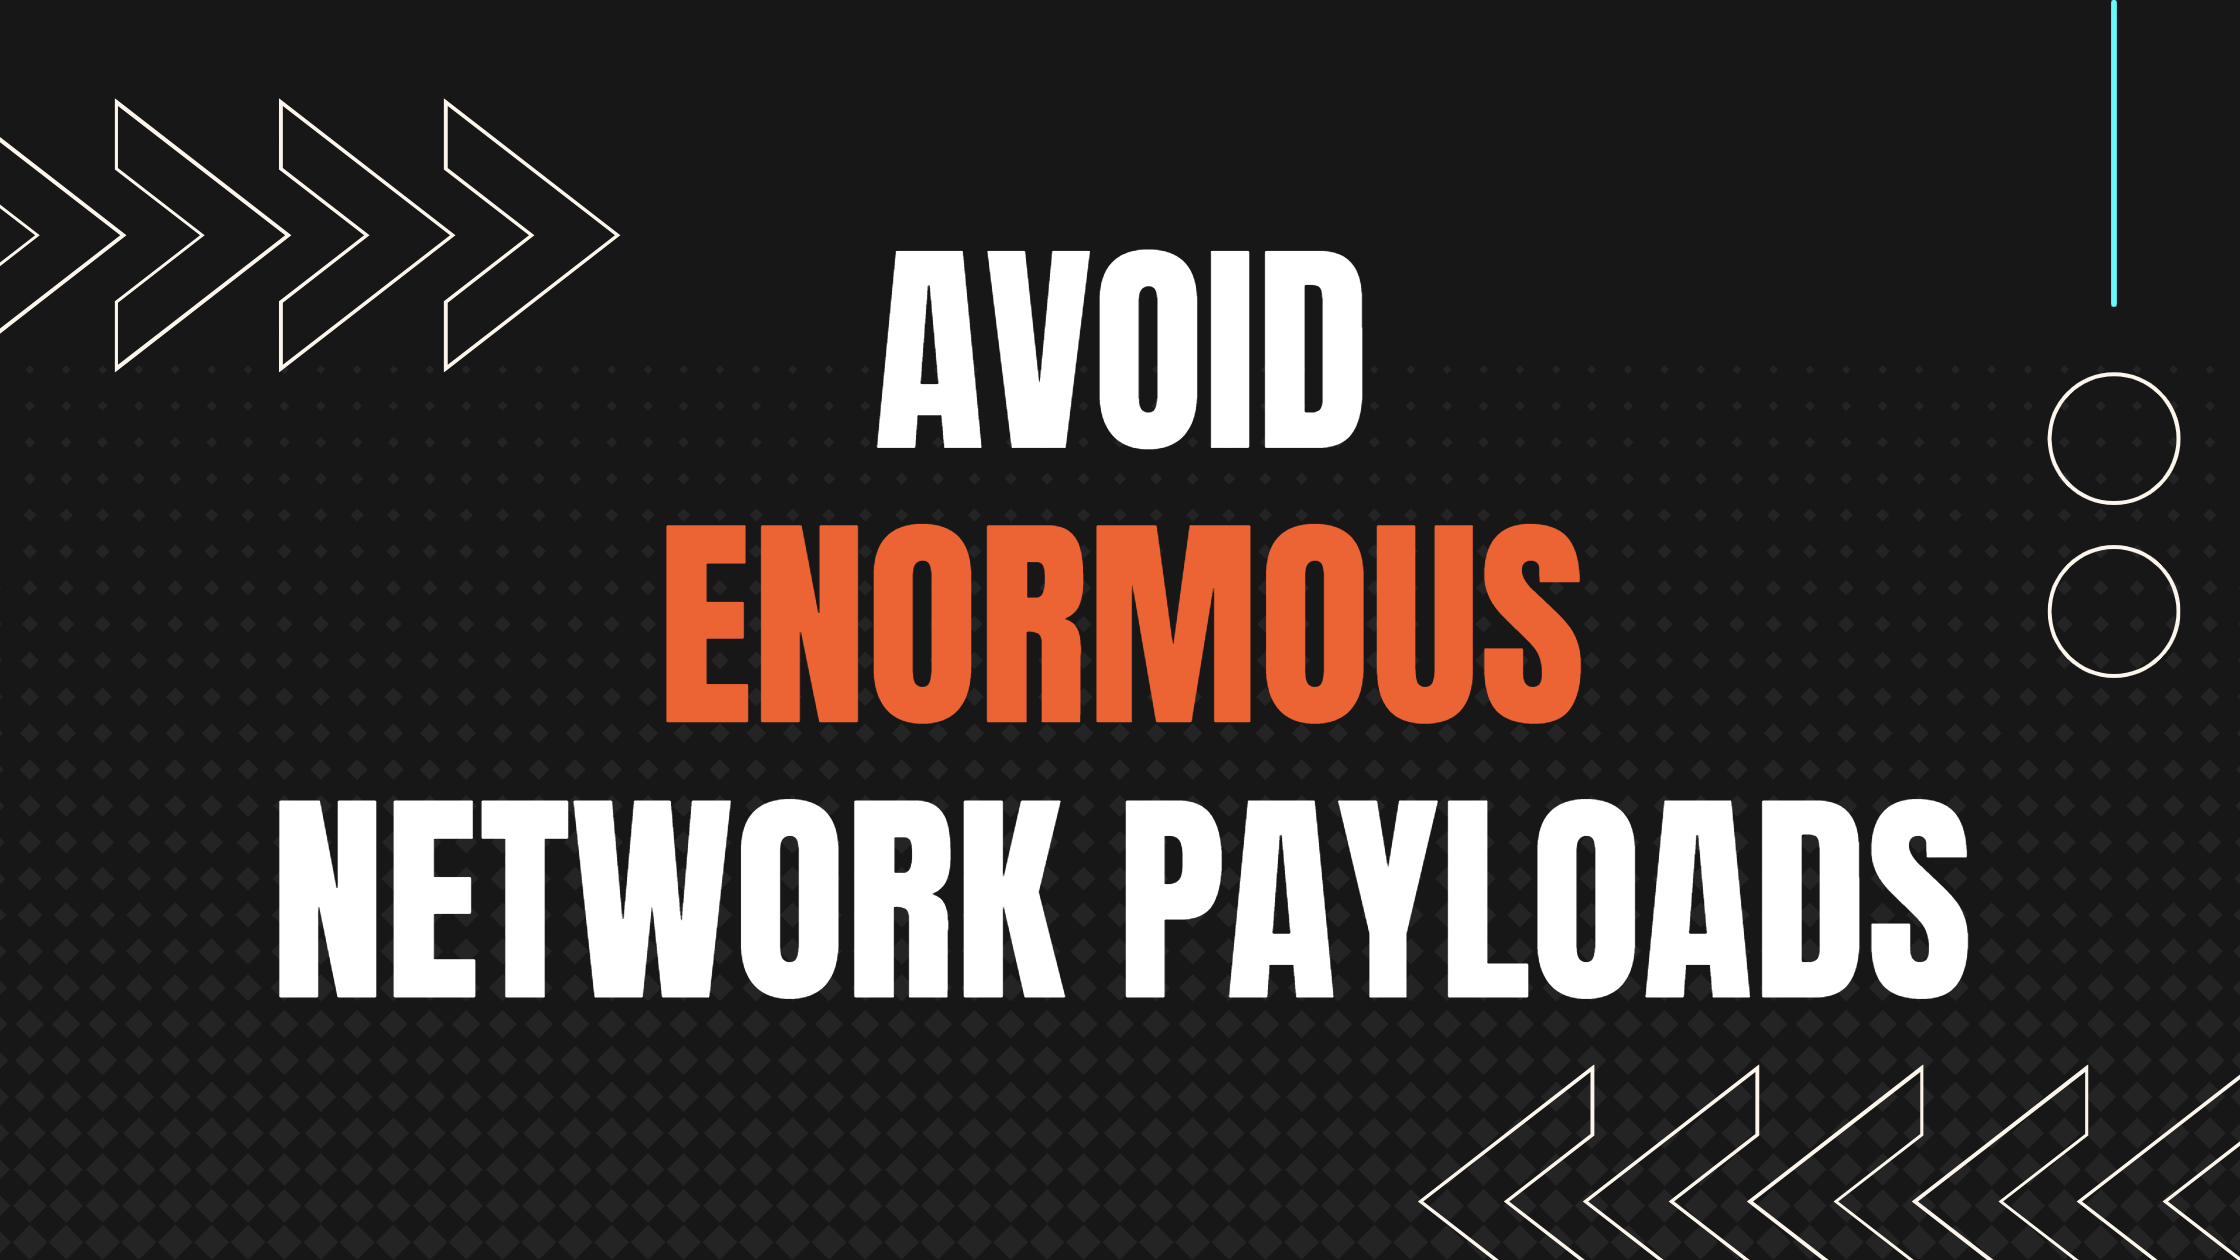 How to avoid enormous network payloads